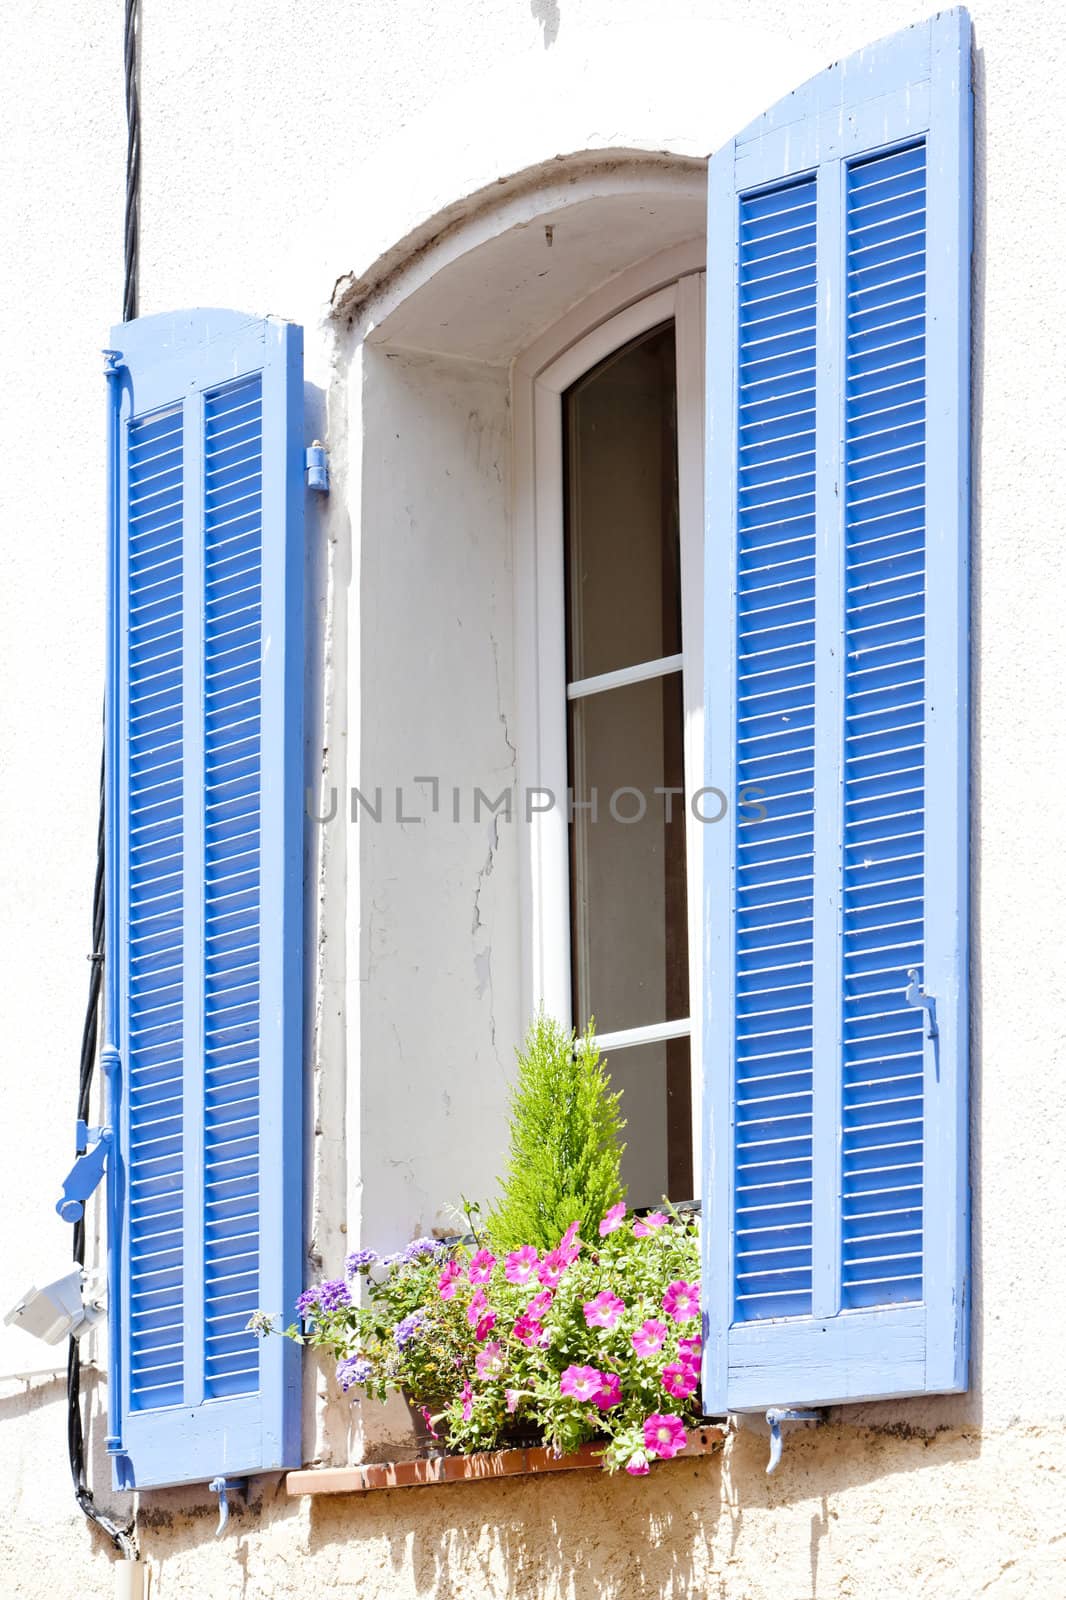 window with blue window shutter, Greoux-les-Bains, Provence, France